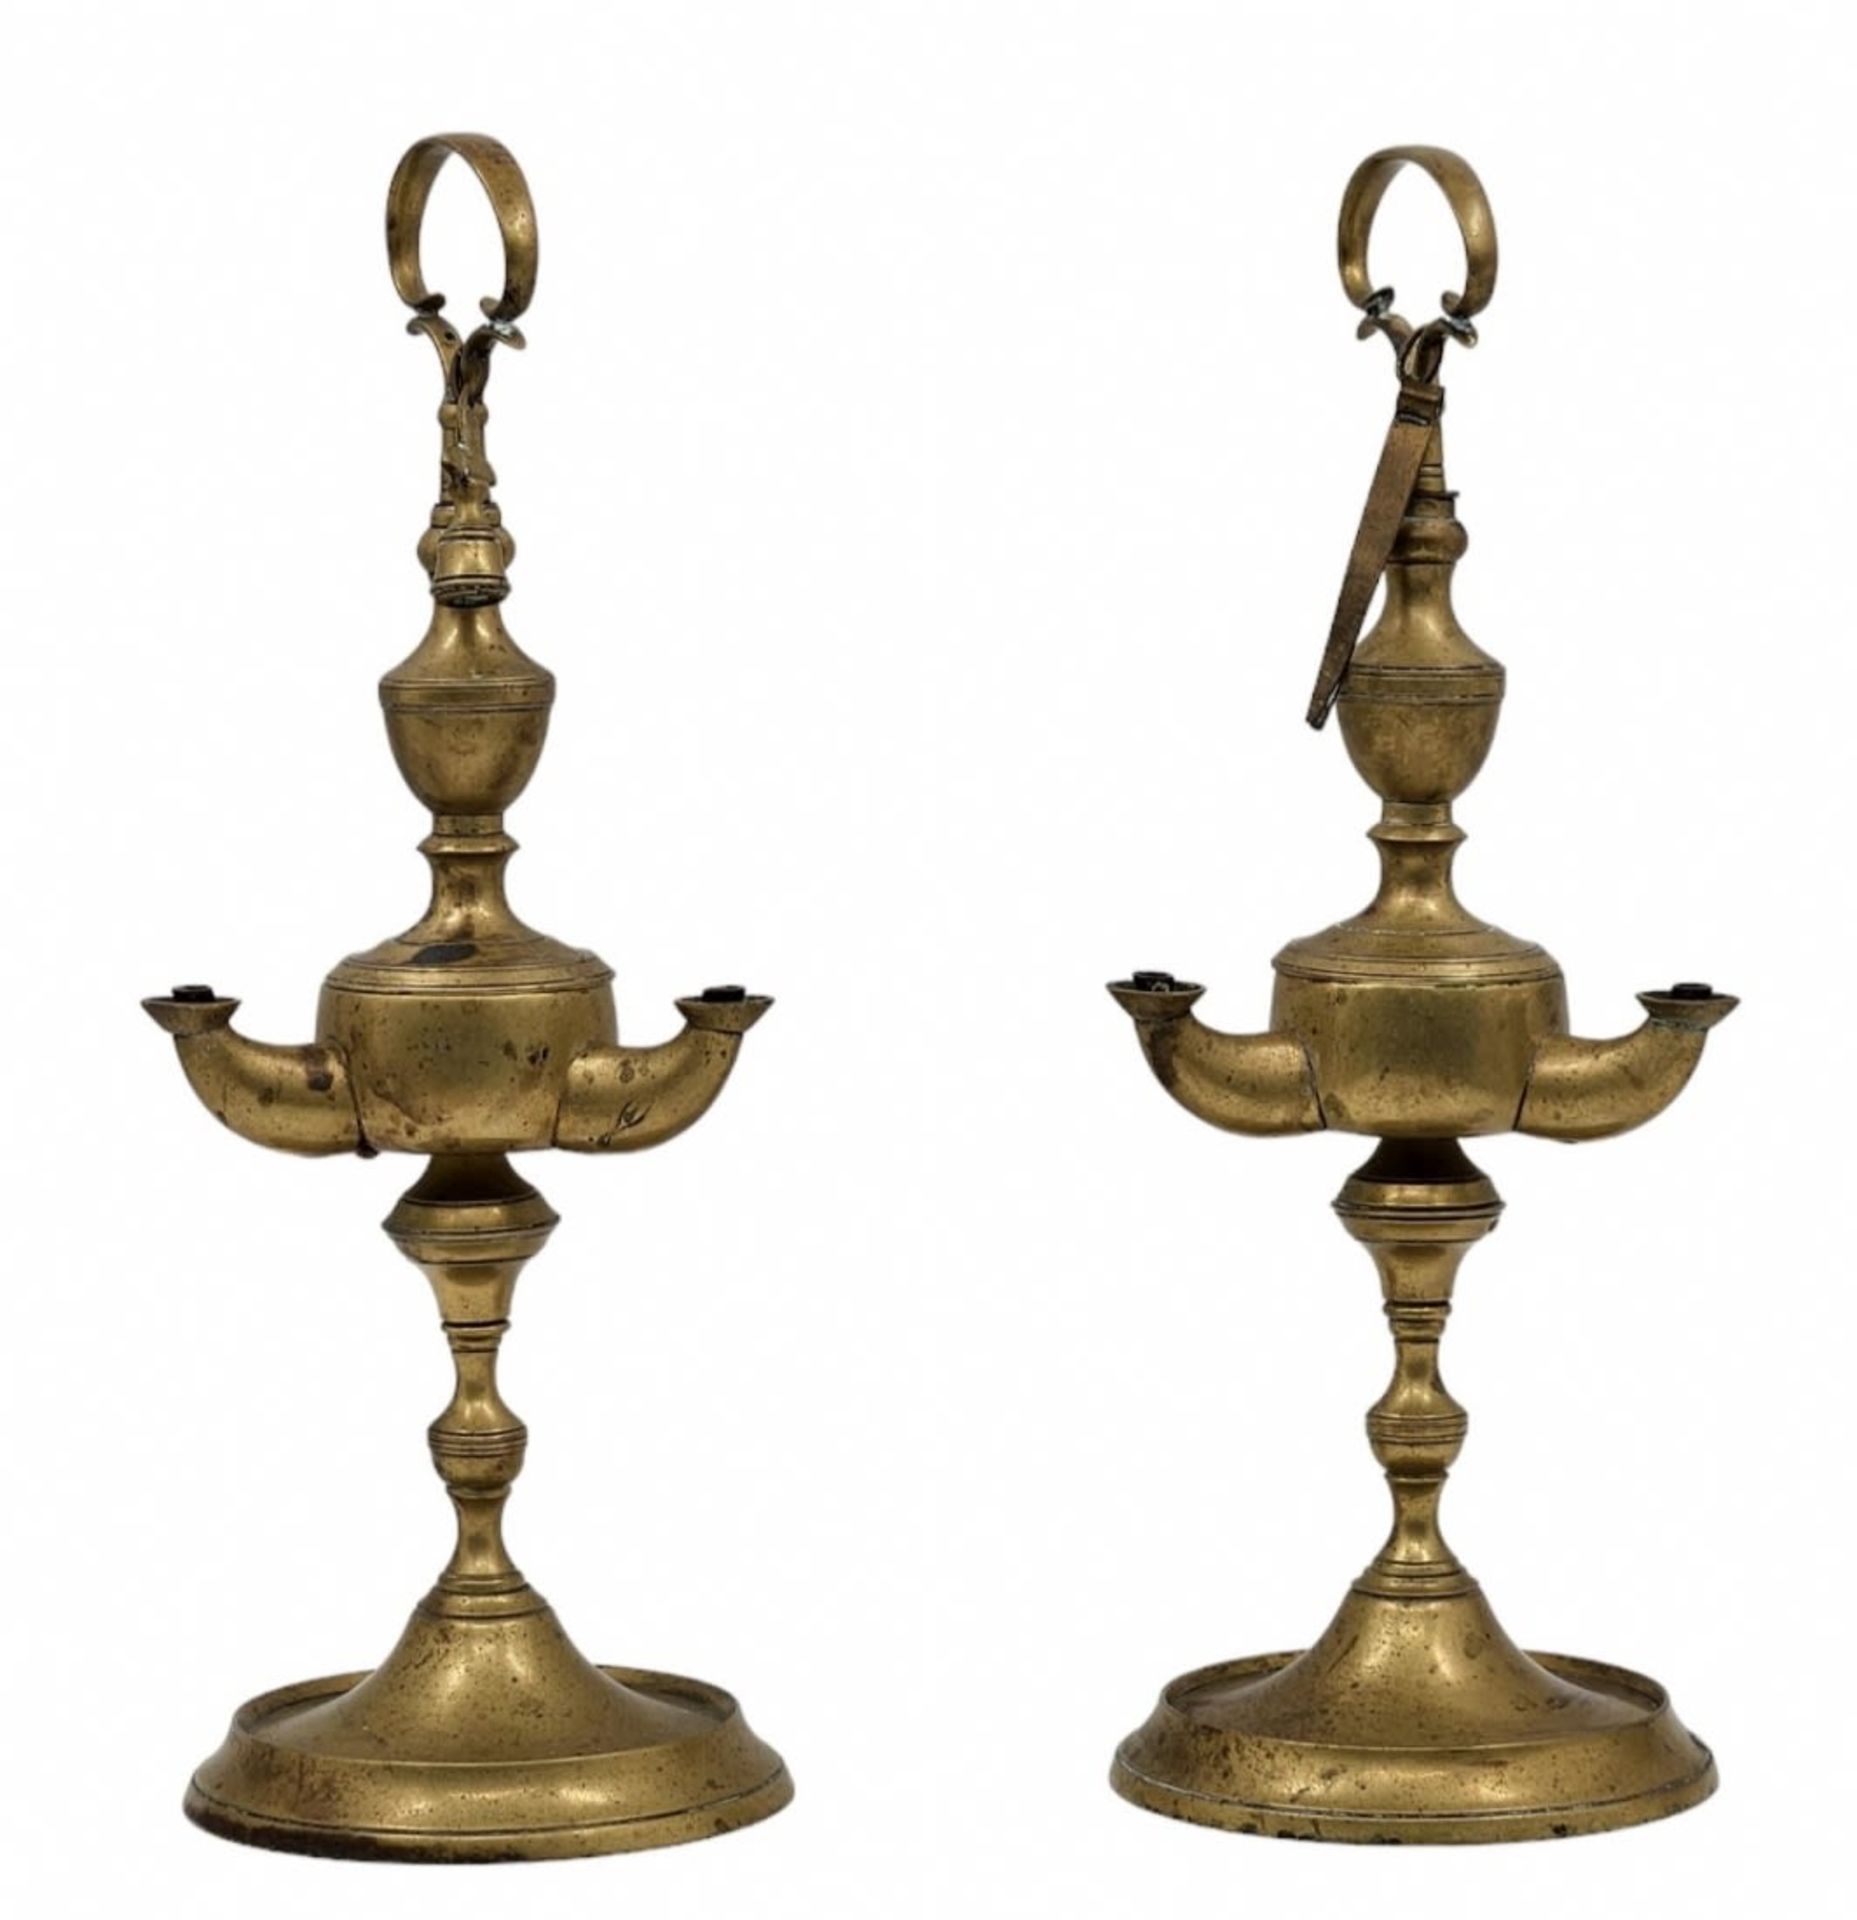 A pair of antique Italian 'Lucerna' type oil lamps, made of brass, late 19th century, Width: 12.5 - Image 2 of 3